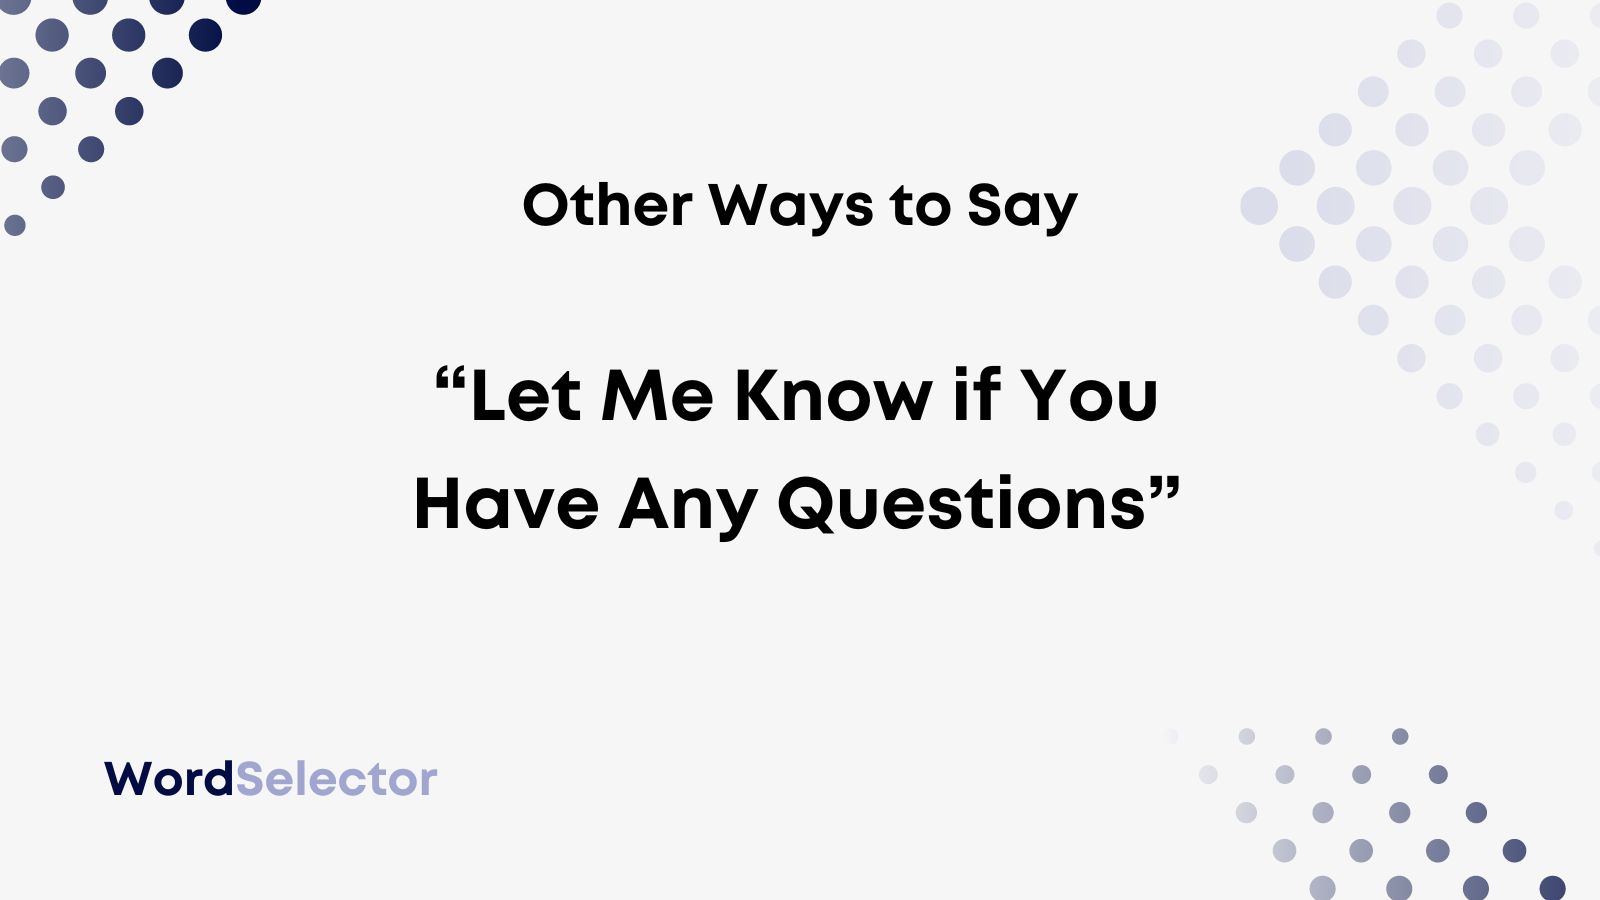 11 Other Ways to Say “Let Me Know if You Have Any Questions” - WordSelector